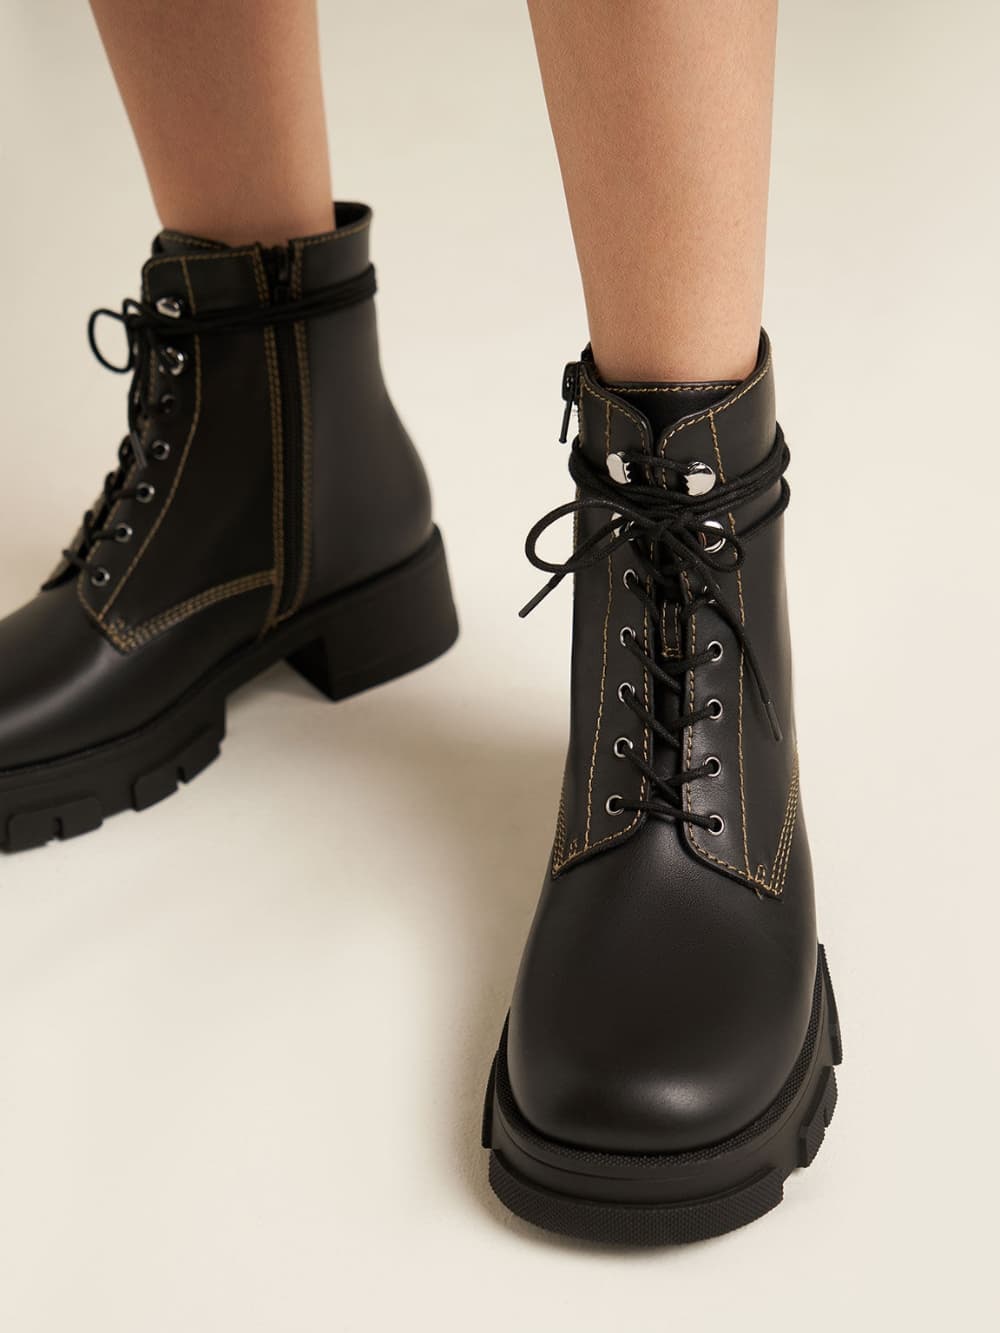 Women's black lace-up combat boots - CHARLES & KEITH